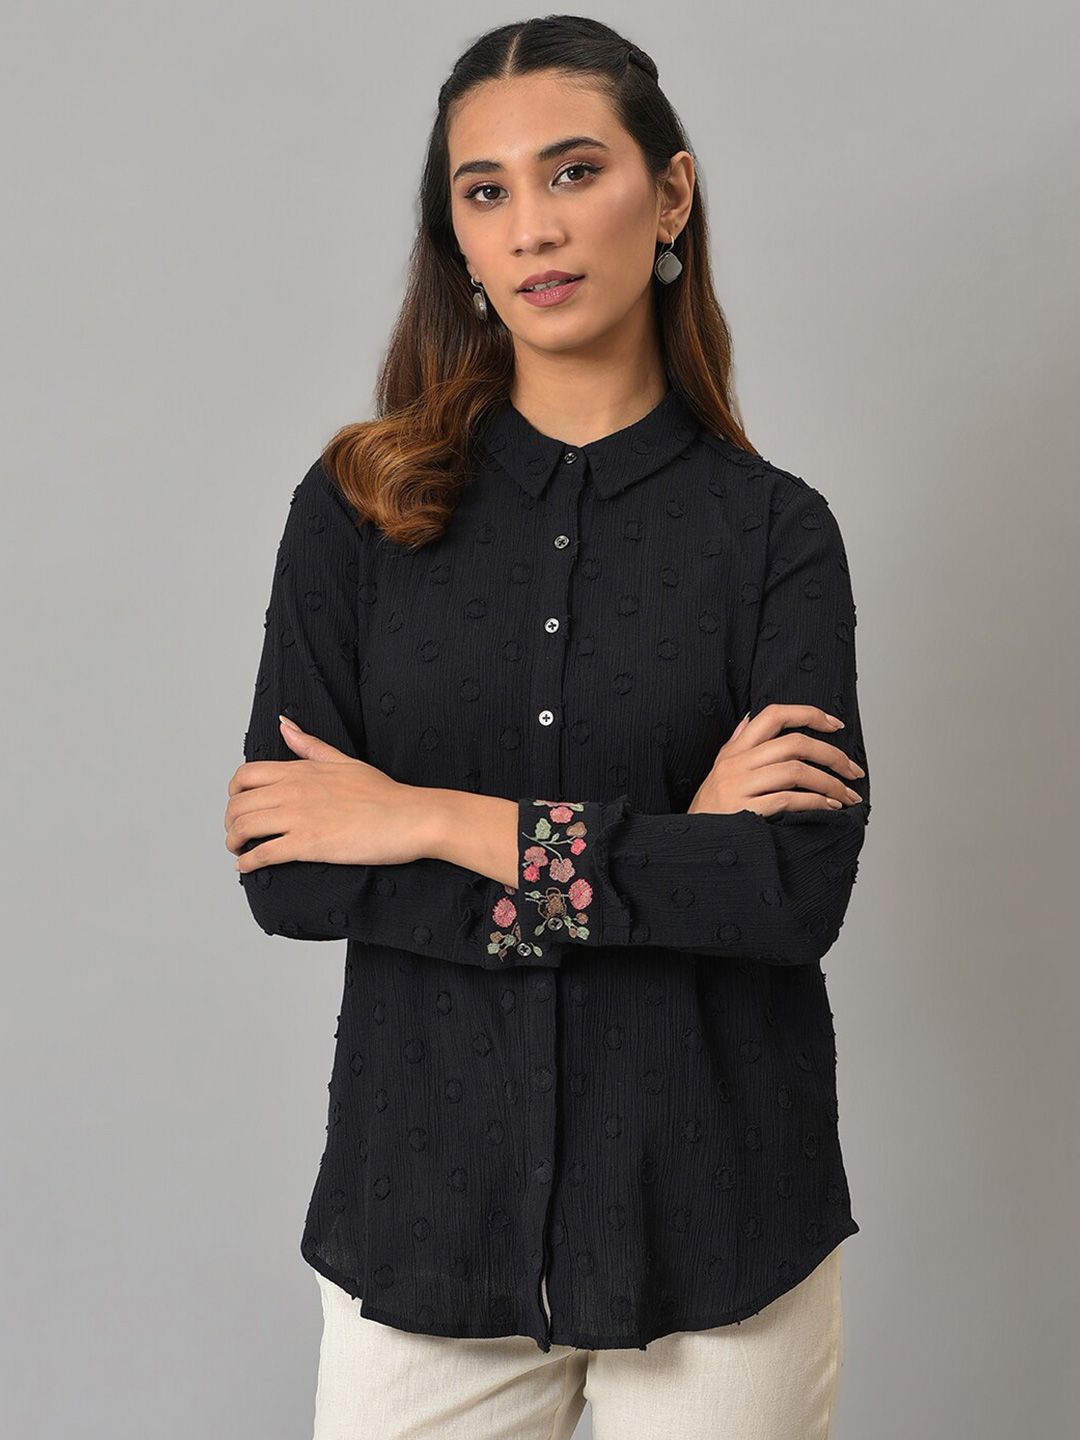 W Black Print Shirt Style Top Price in India